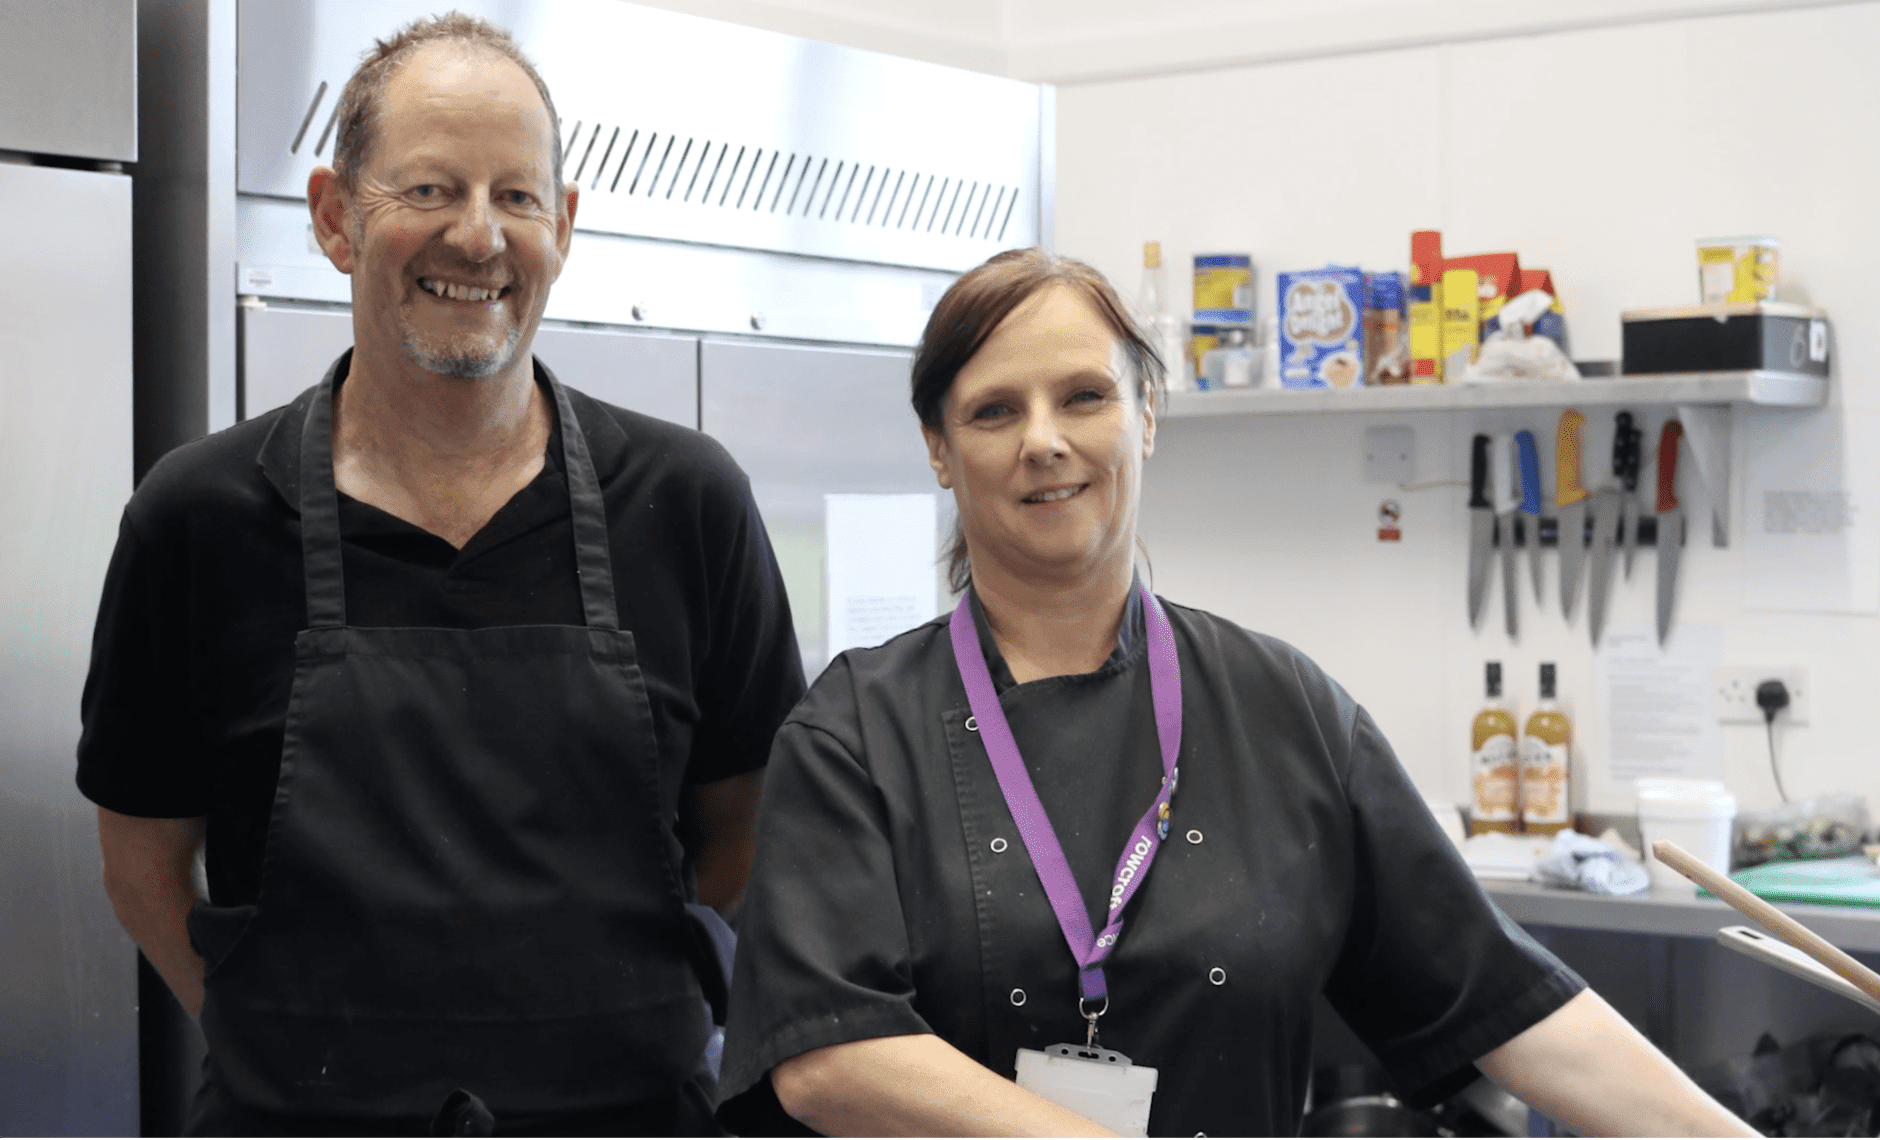 Dave Whiting and Jackie Rowlands smile for a photo in their chefs clothing.